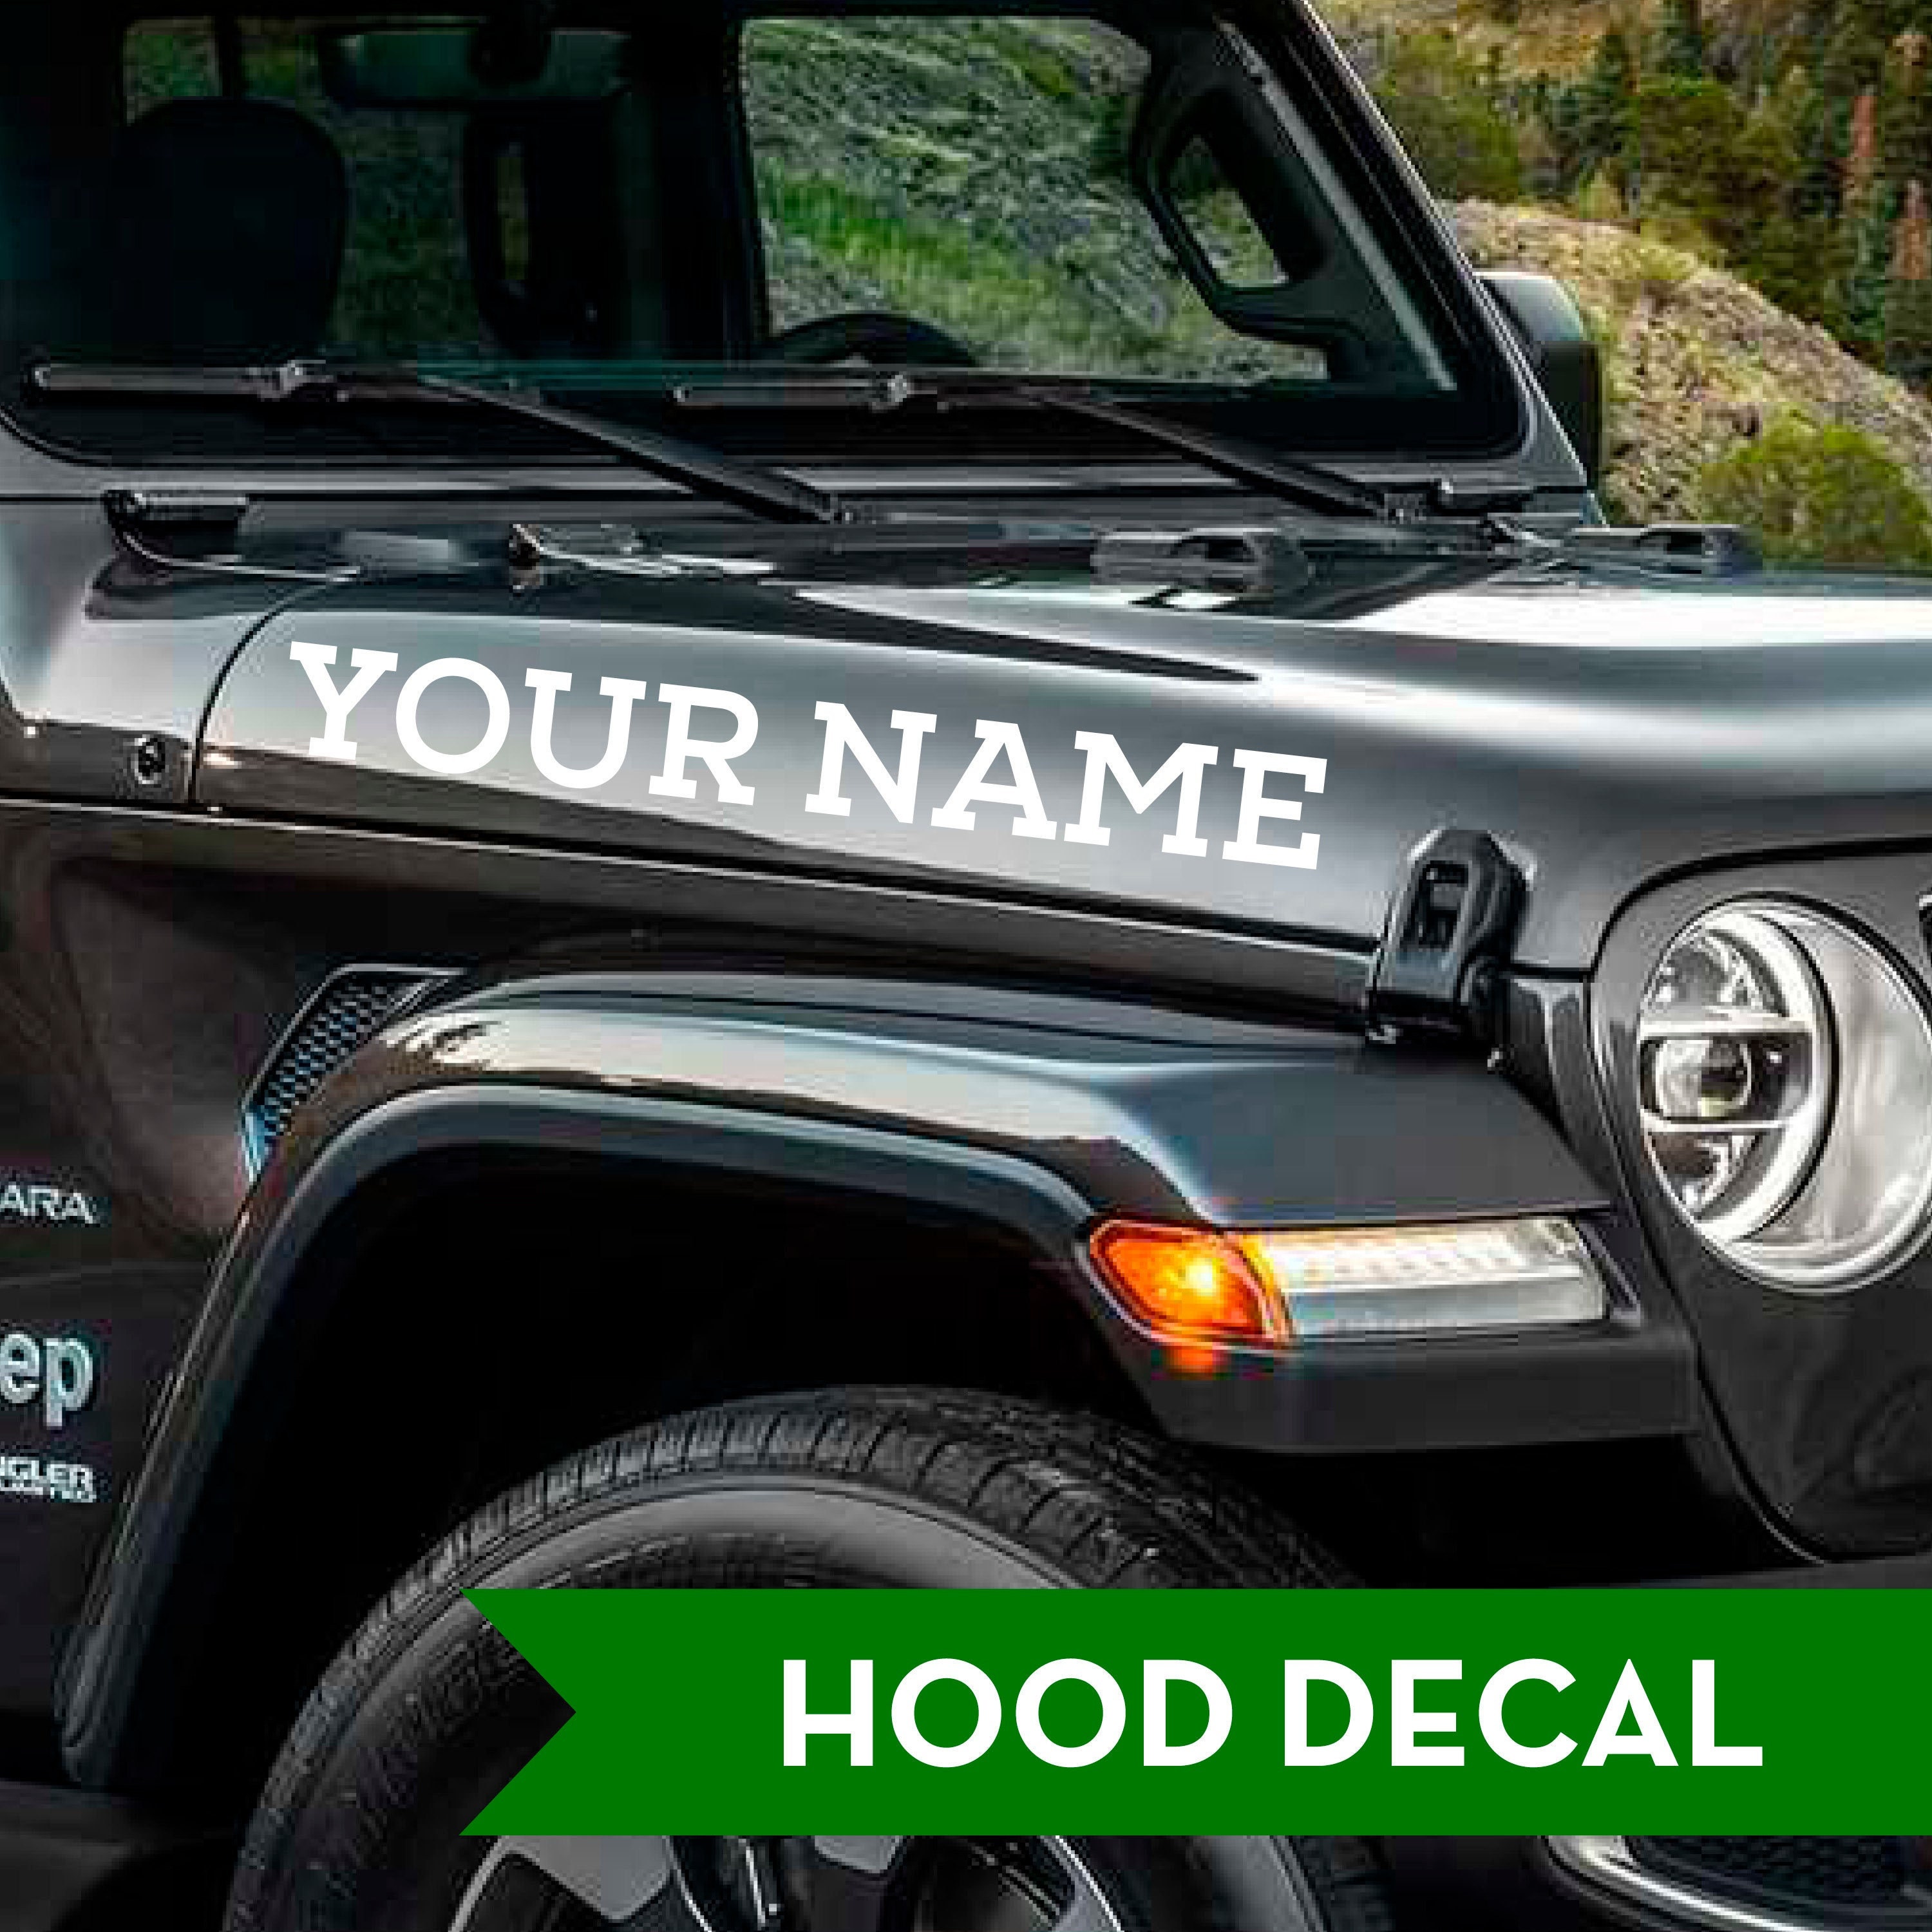 Jeep Wrangler Hood Decal set of 2 Choose Color and Text - Etsy